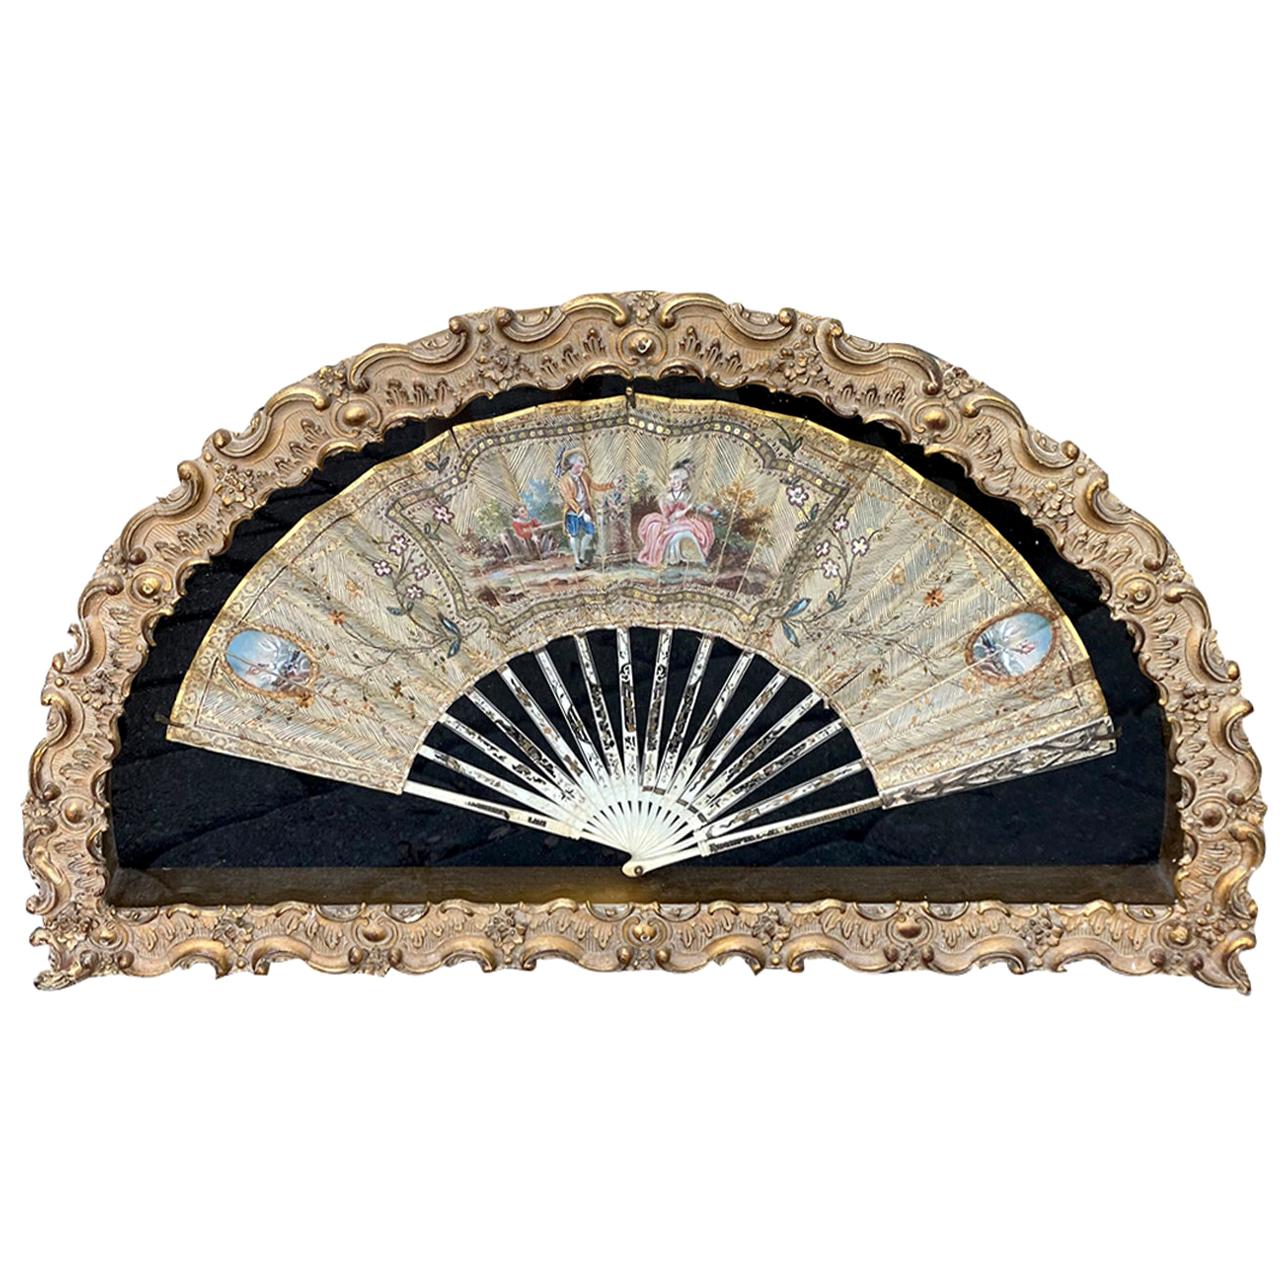 Early 18th Century French Fan in Gilt Display Case